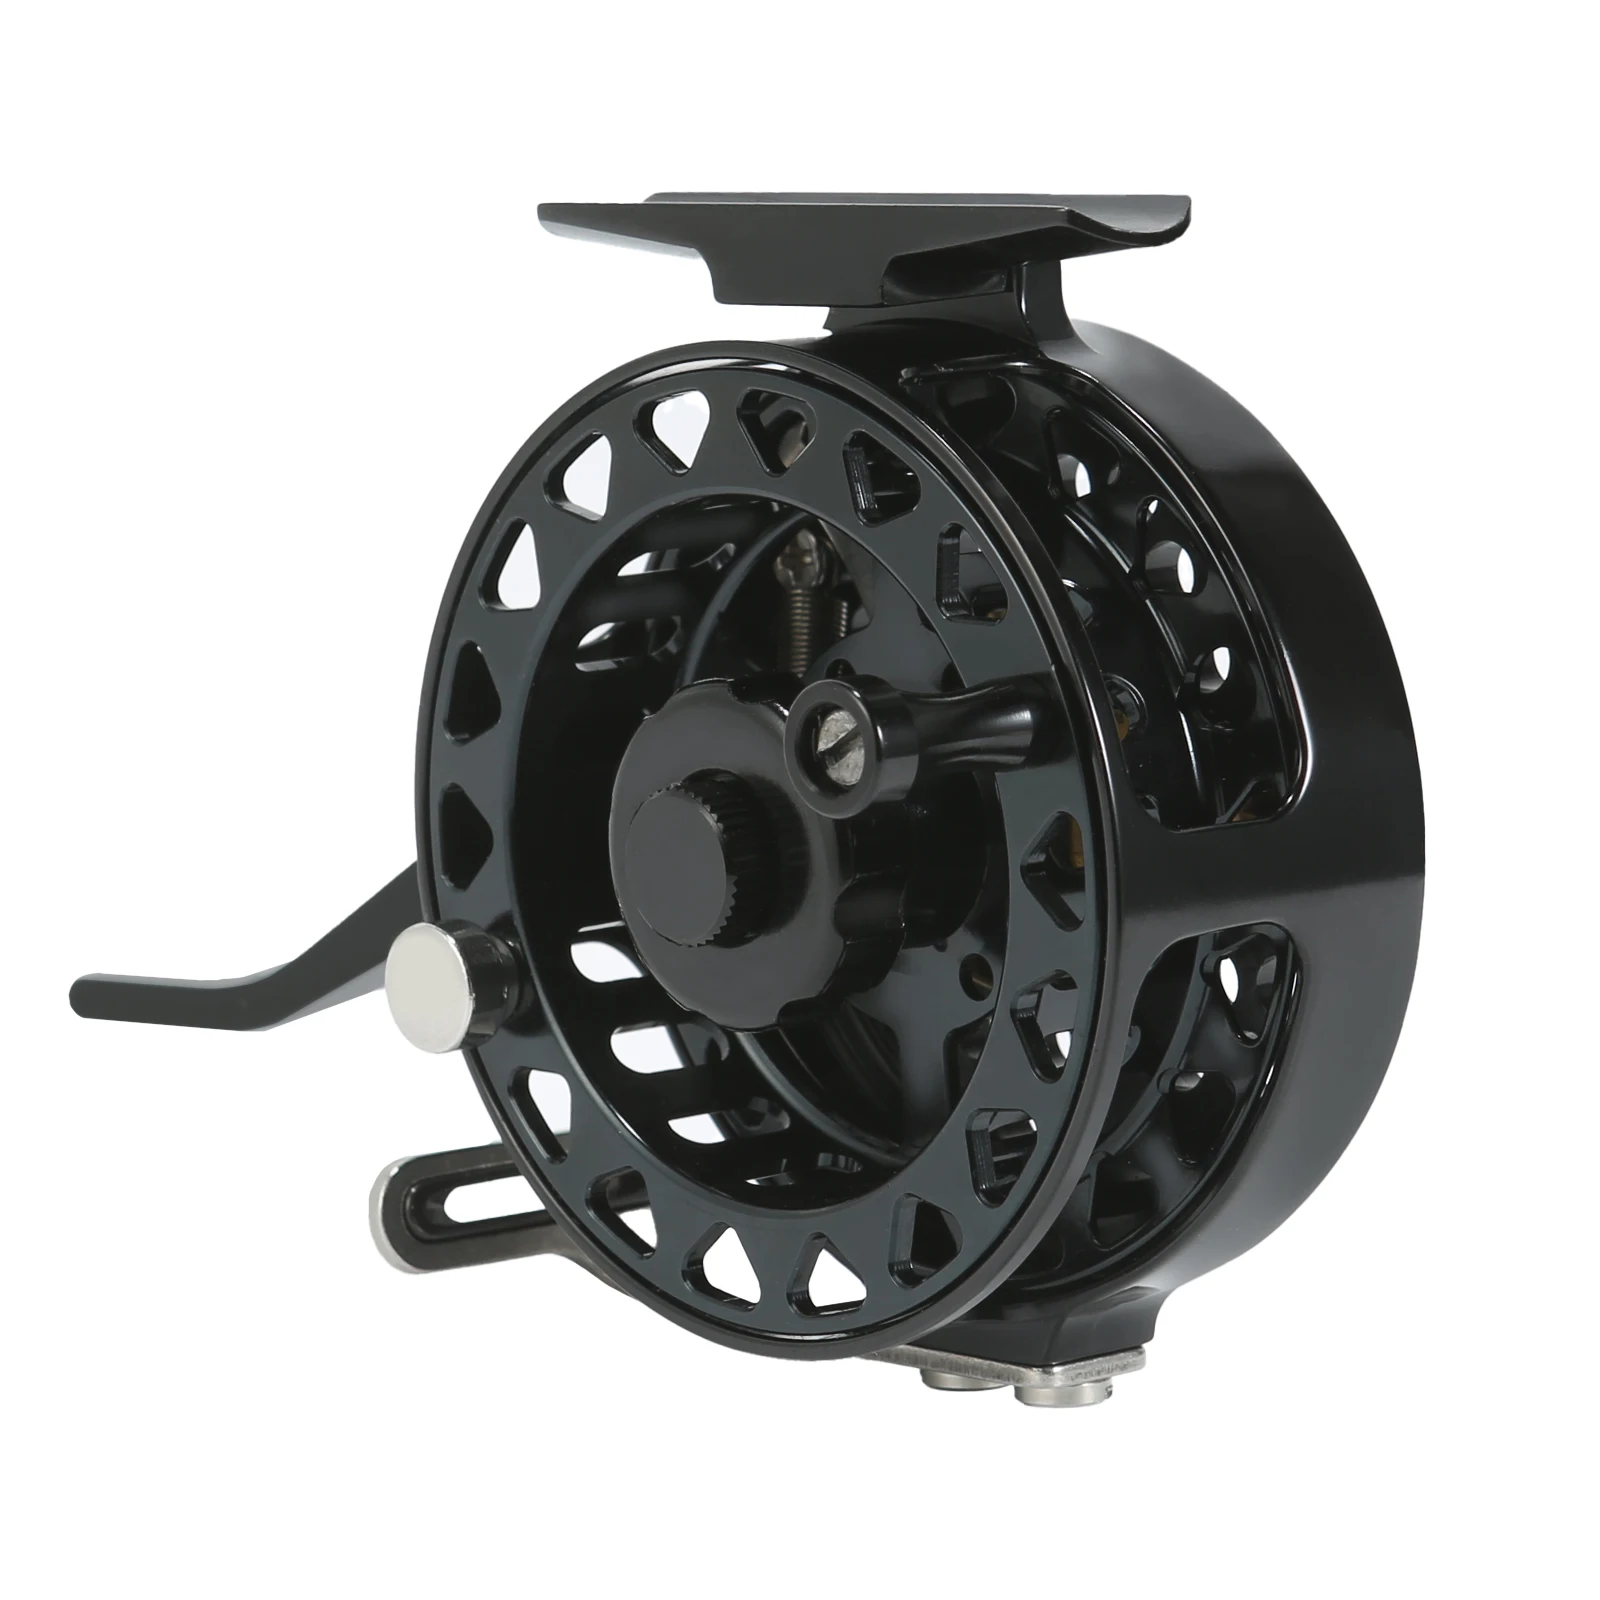 Aluminum CNC Machine Cut Fly Fishing Reel Ins With Large Arbor Die Casting  Set Of 2 Probertos Wheel 3 8 WT Reel In 231120 From Zhi09, $24